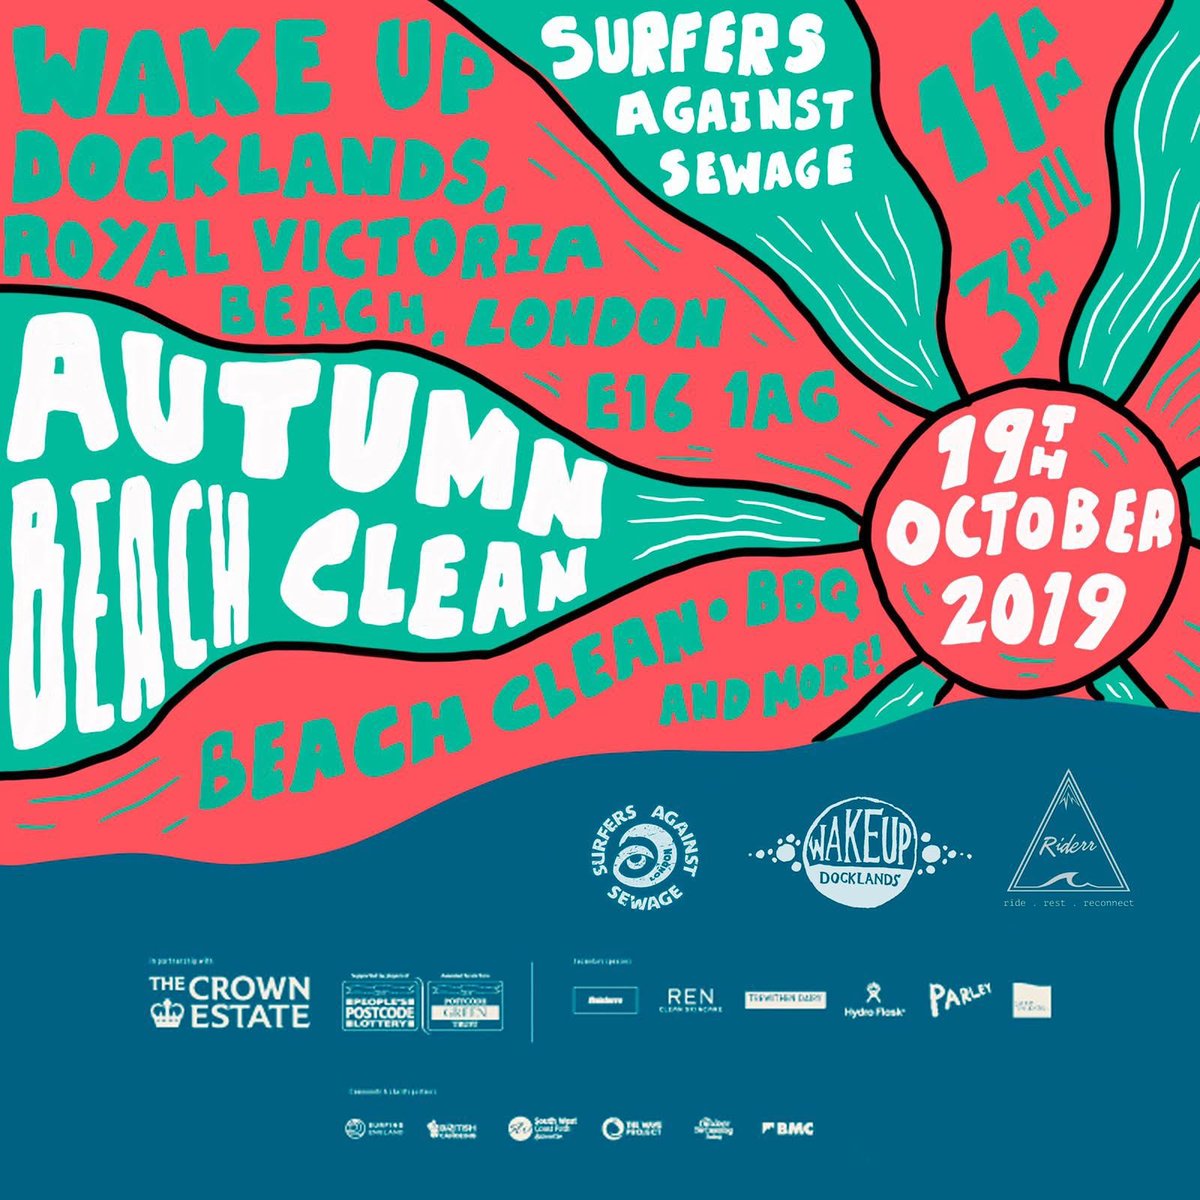 Come and join us at London's autumn Beach Clean on 19th Oct at Royal Victoria Beach E16. Register to help at eventbrite.com/e/surfers-agai… Look forward to seeing you there @sascampaigns @wakeupdocklands